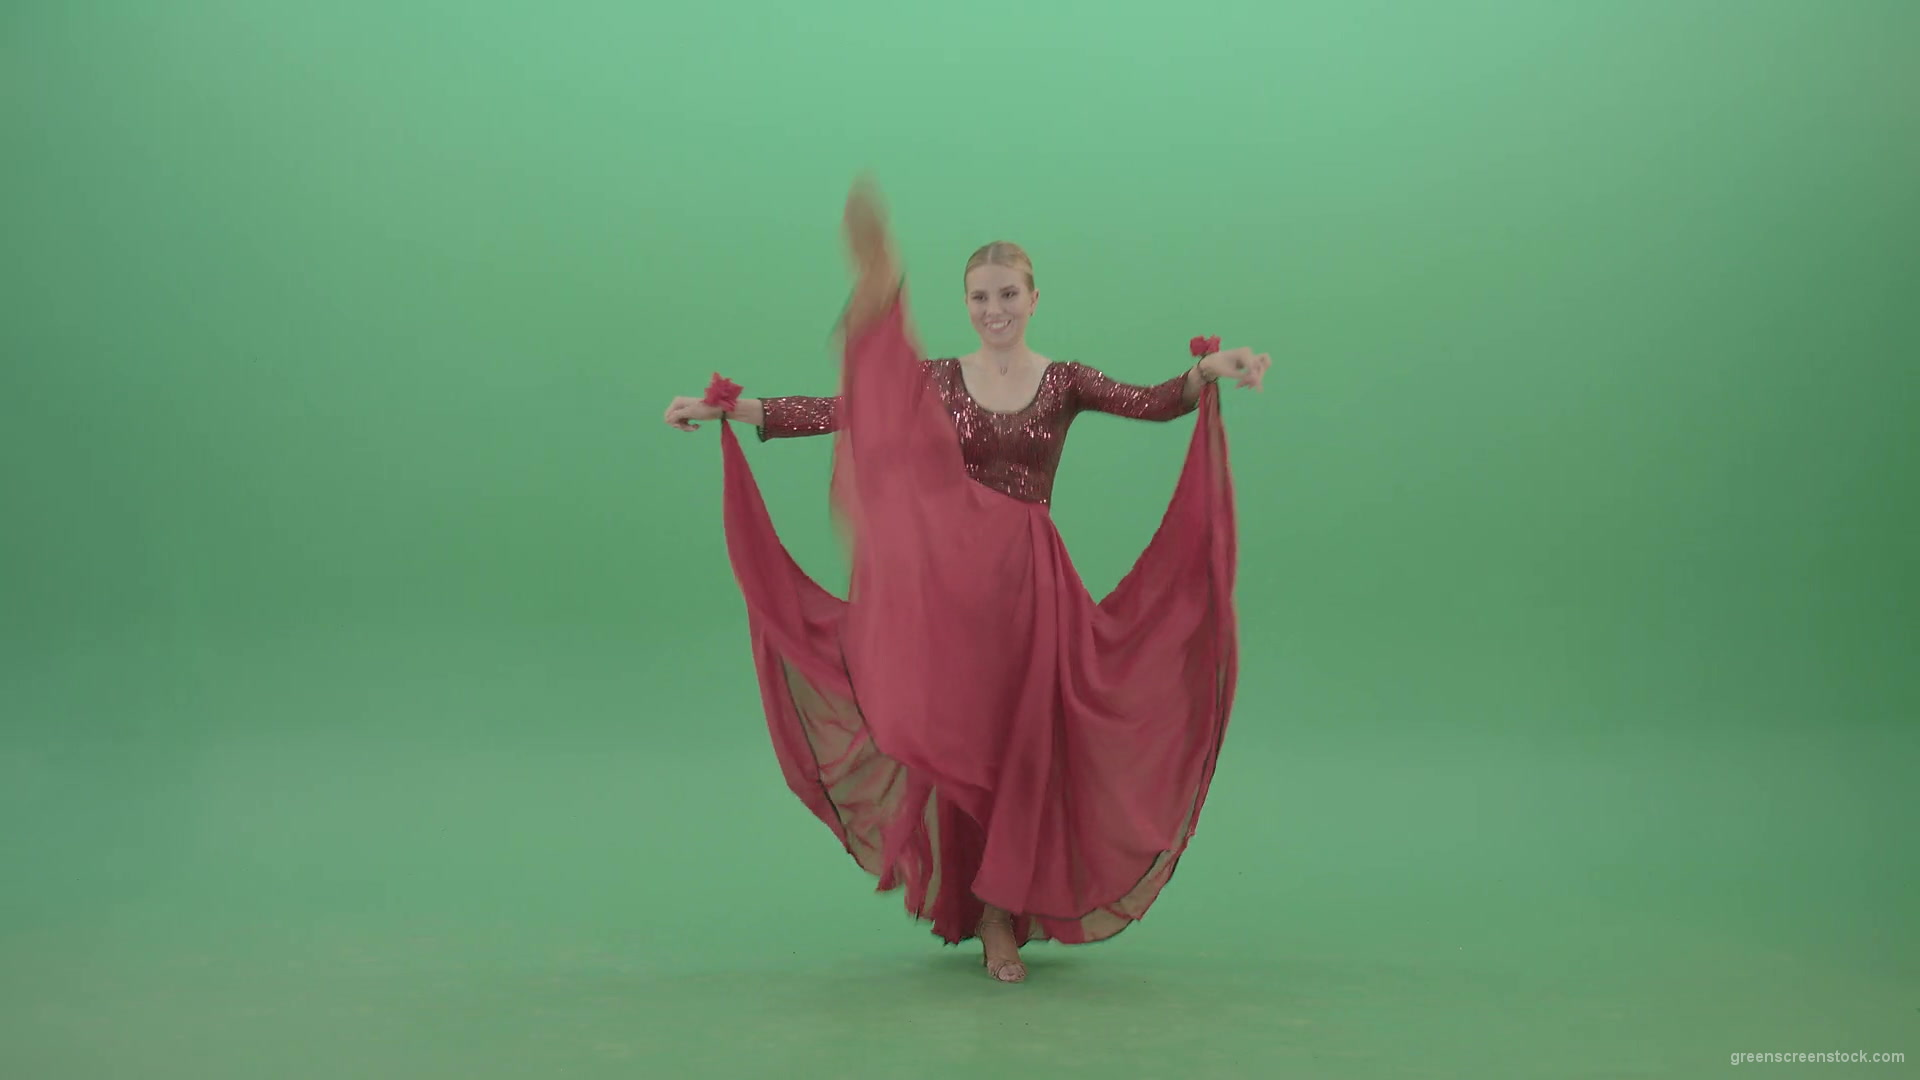 Moulin-rouge-dancing-girl-in-red-dress-jumping-on-green-screen-4K-Video-Footage-1920_002 Green Screen Stock